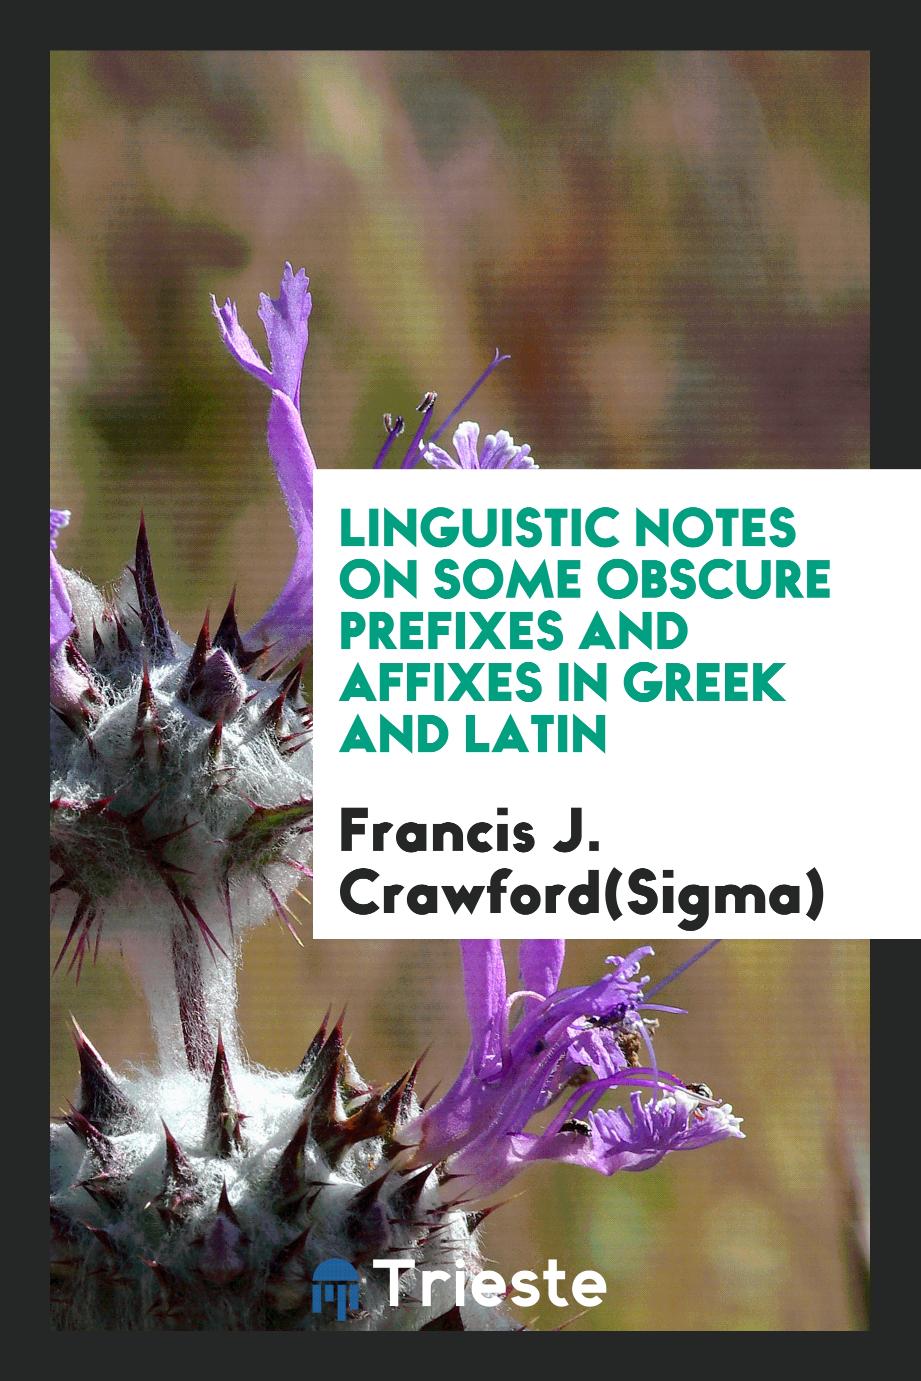 Linguistic Notes on Some Obscure Prefixes and Affixes in Greek and Latin